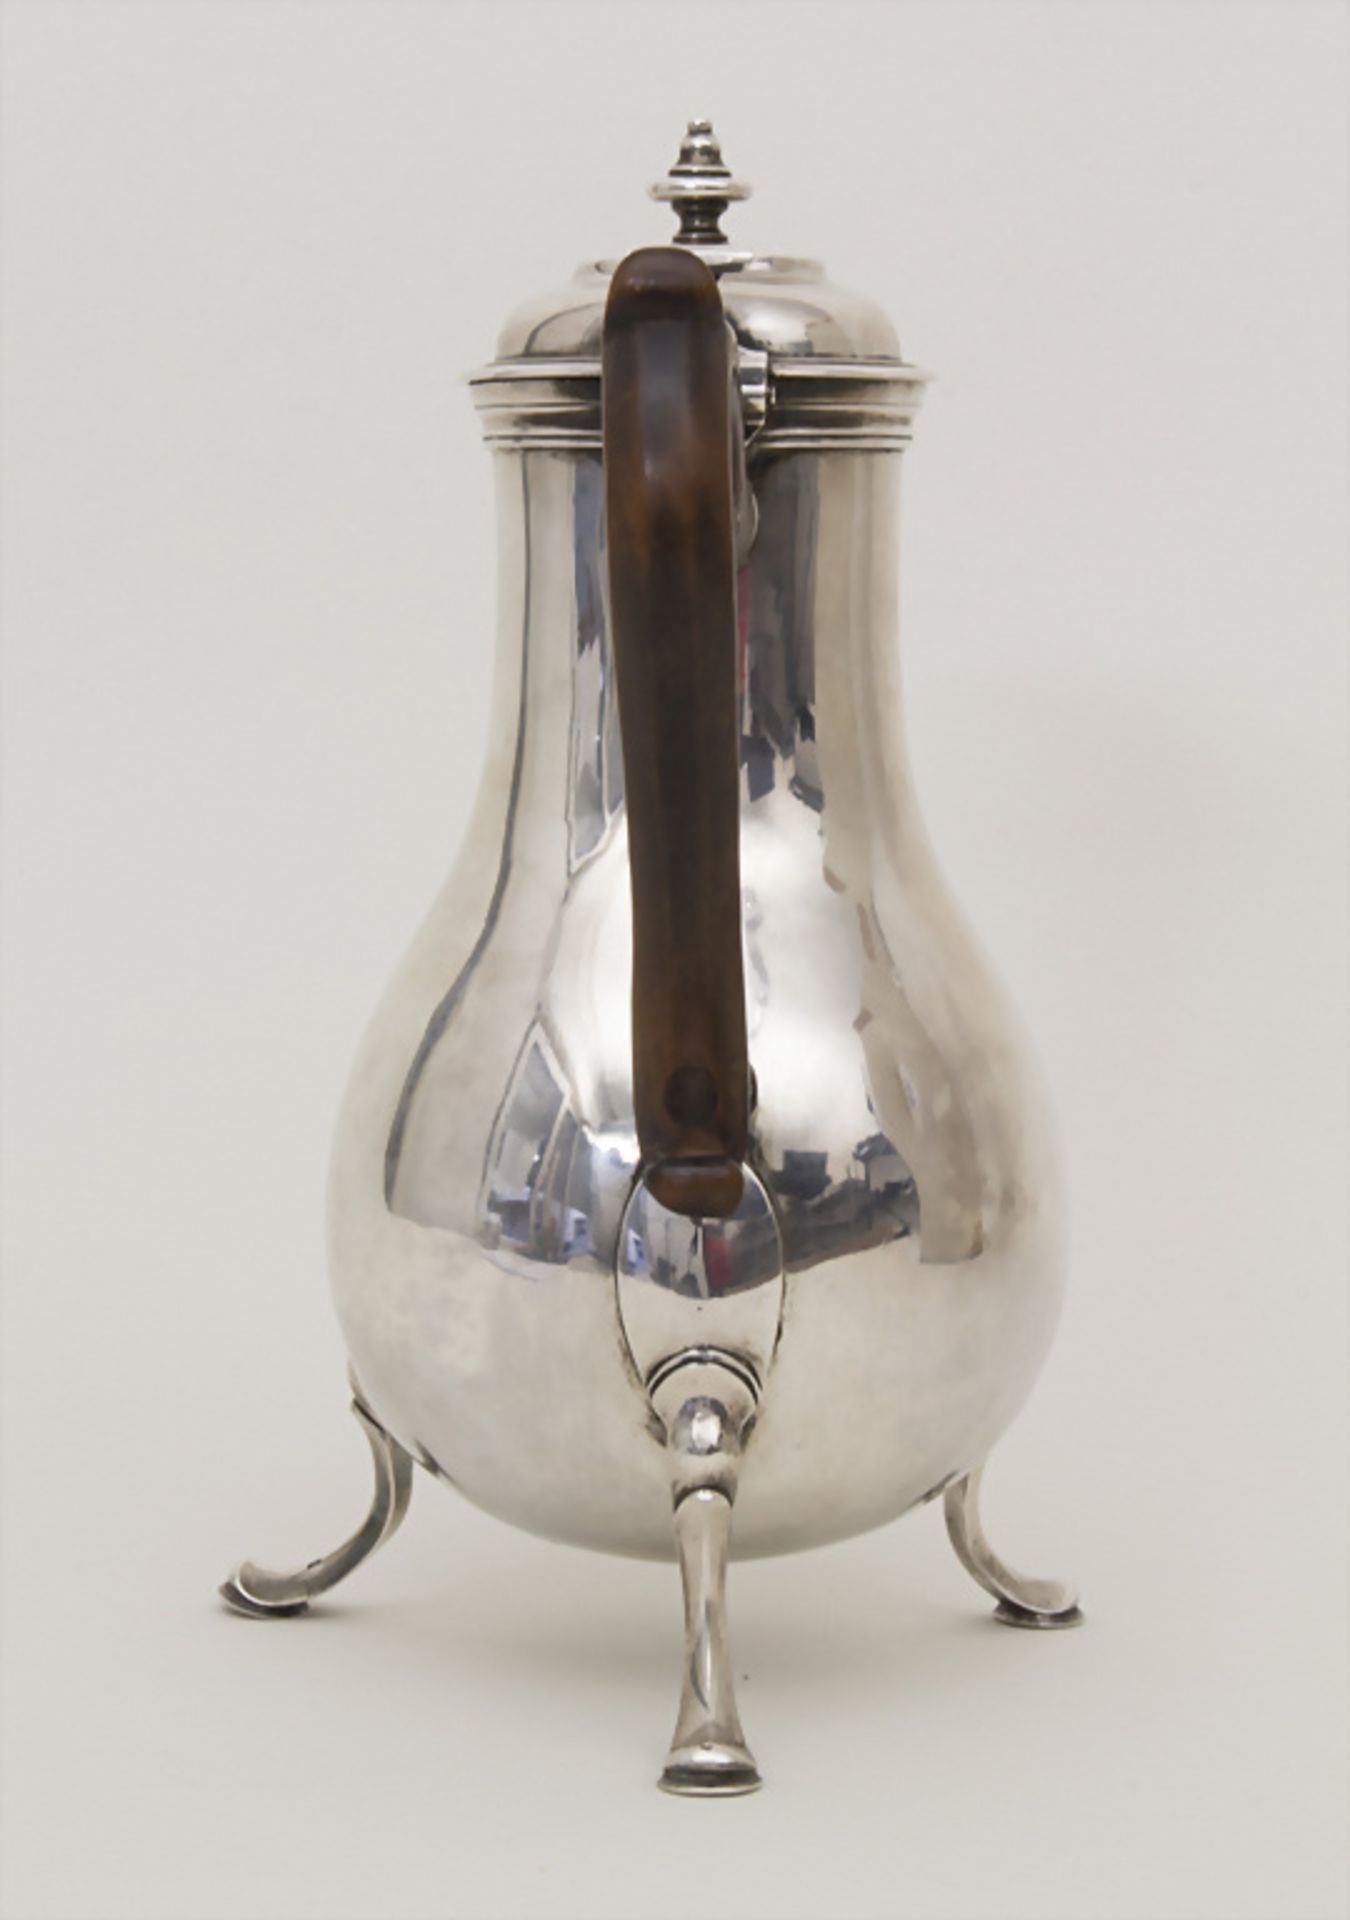 Barock Kanne / Verseuse / A silver coffee pot, Jean-Pierre Dautun (1704-1768), Morges bei ... - Image 7 of 11